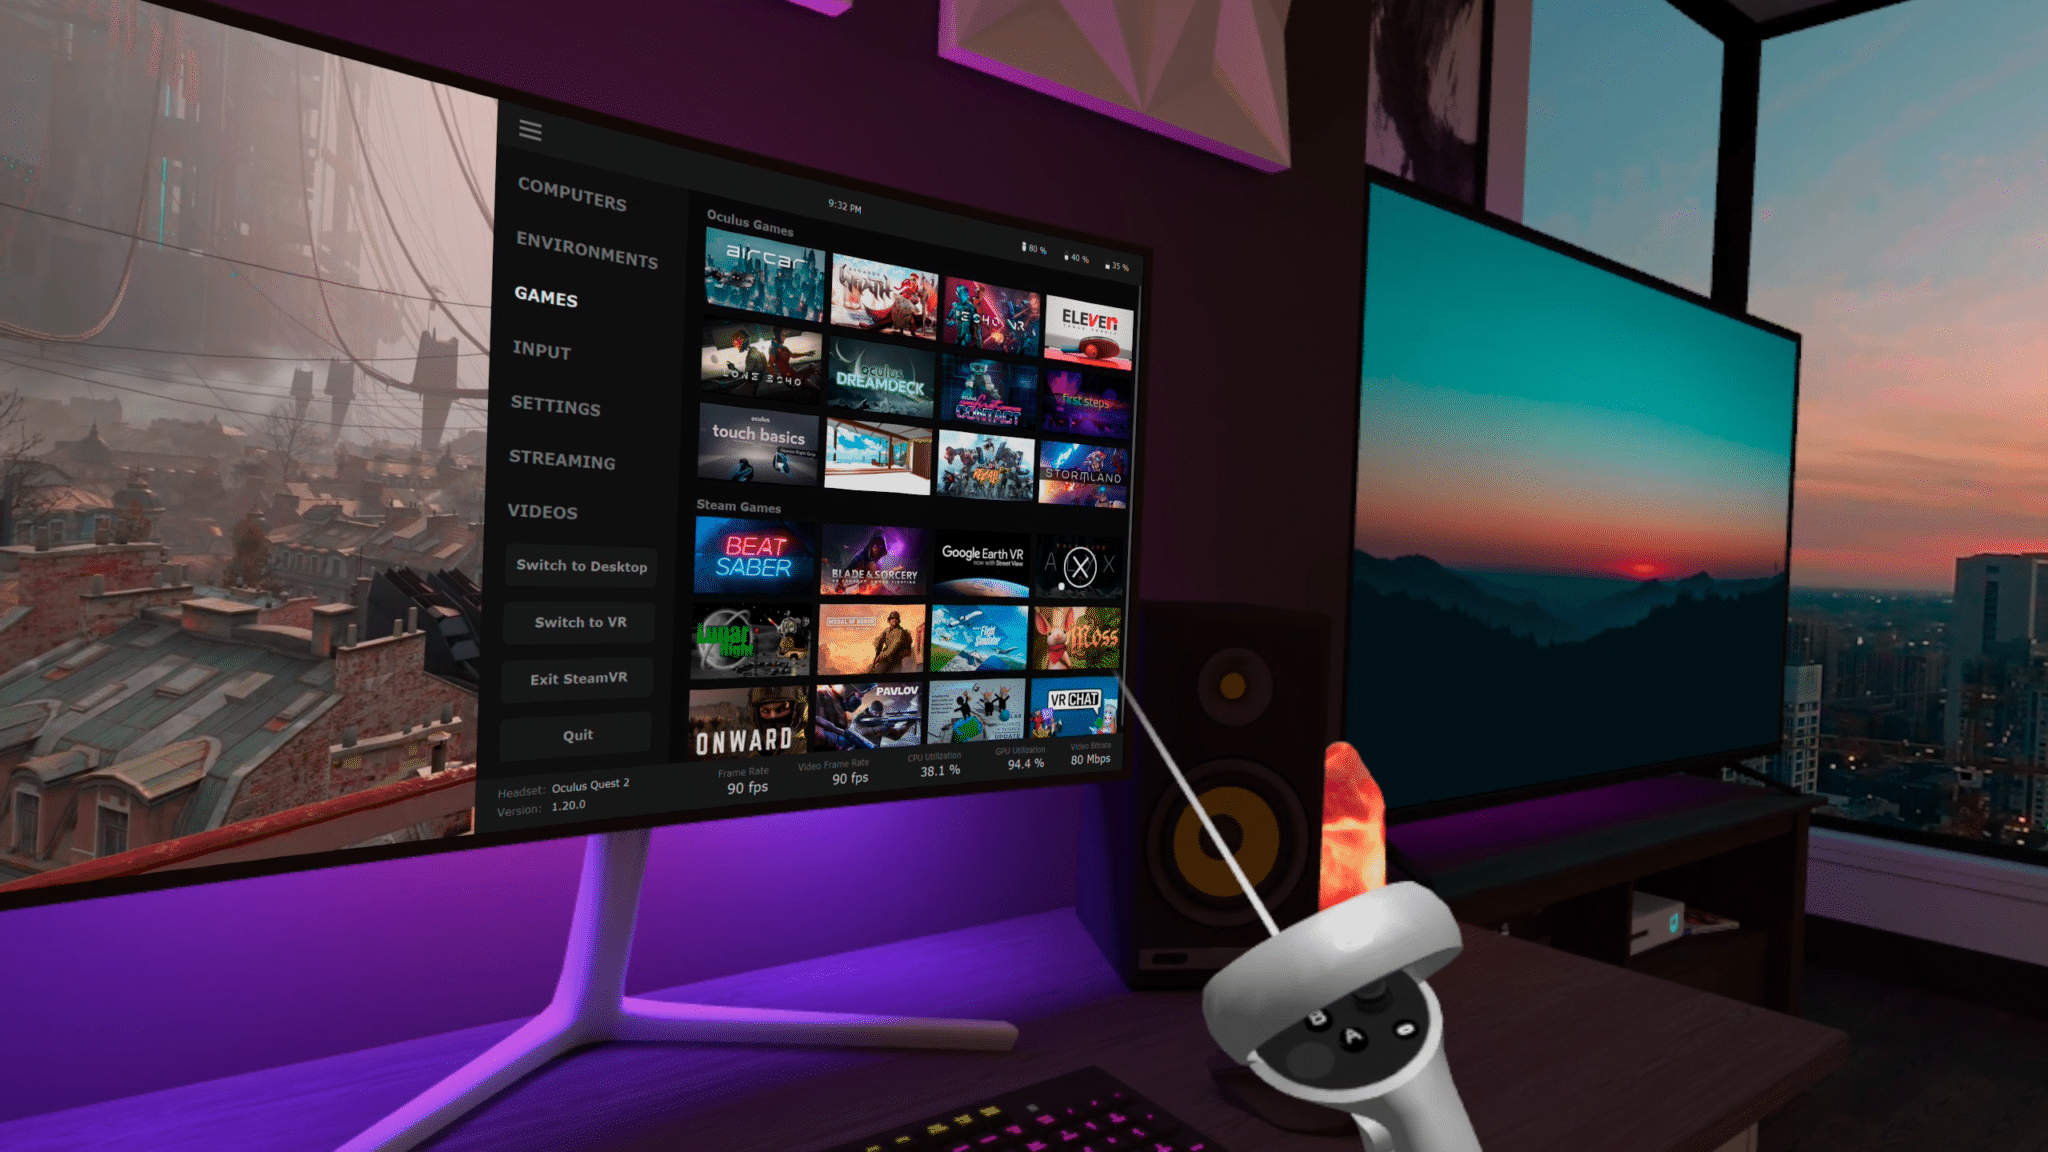 How To Play PC VR Content On Oculus Quest & Quest (Oculus Link, Air Link, Desktop) - Updated 2022